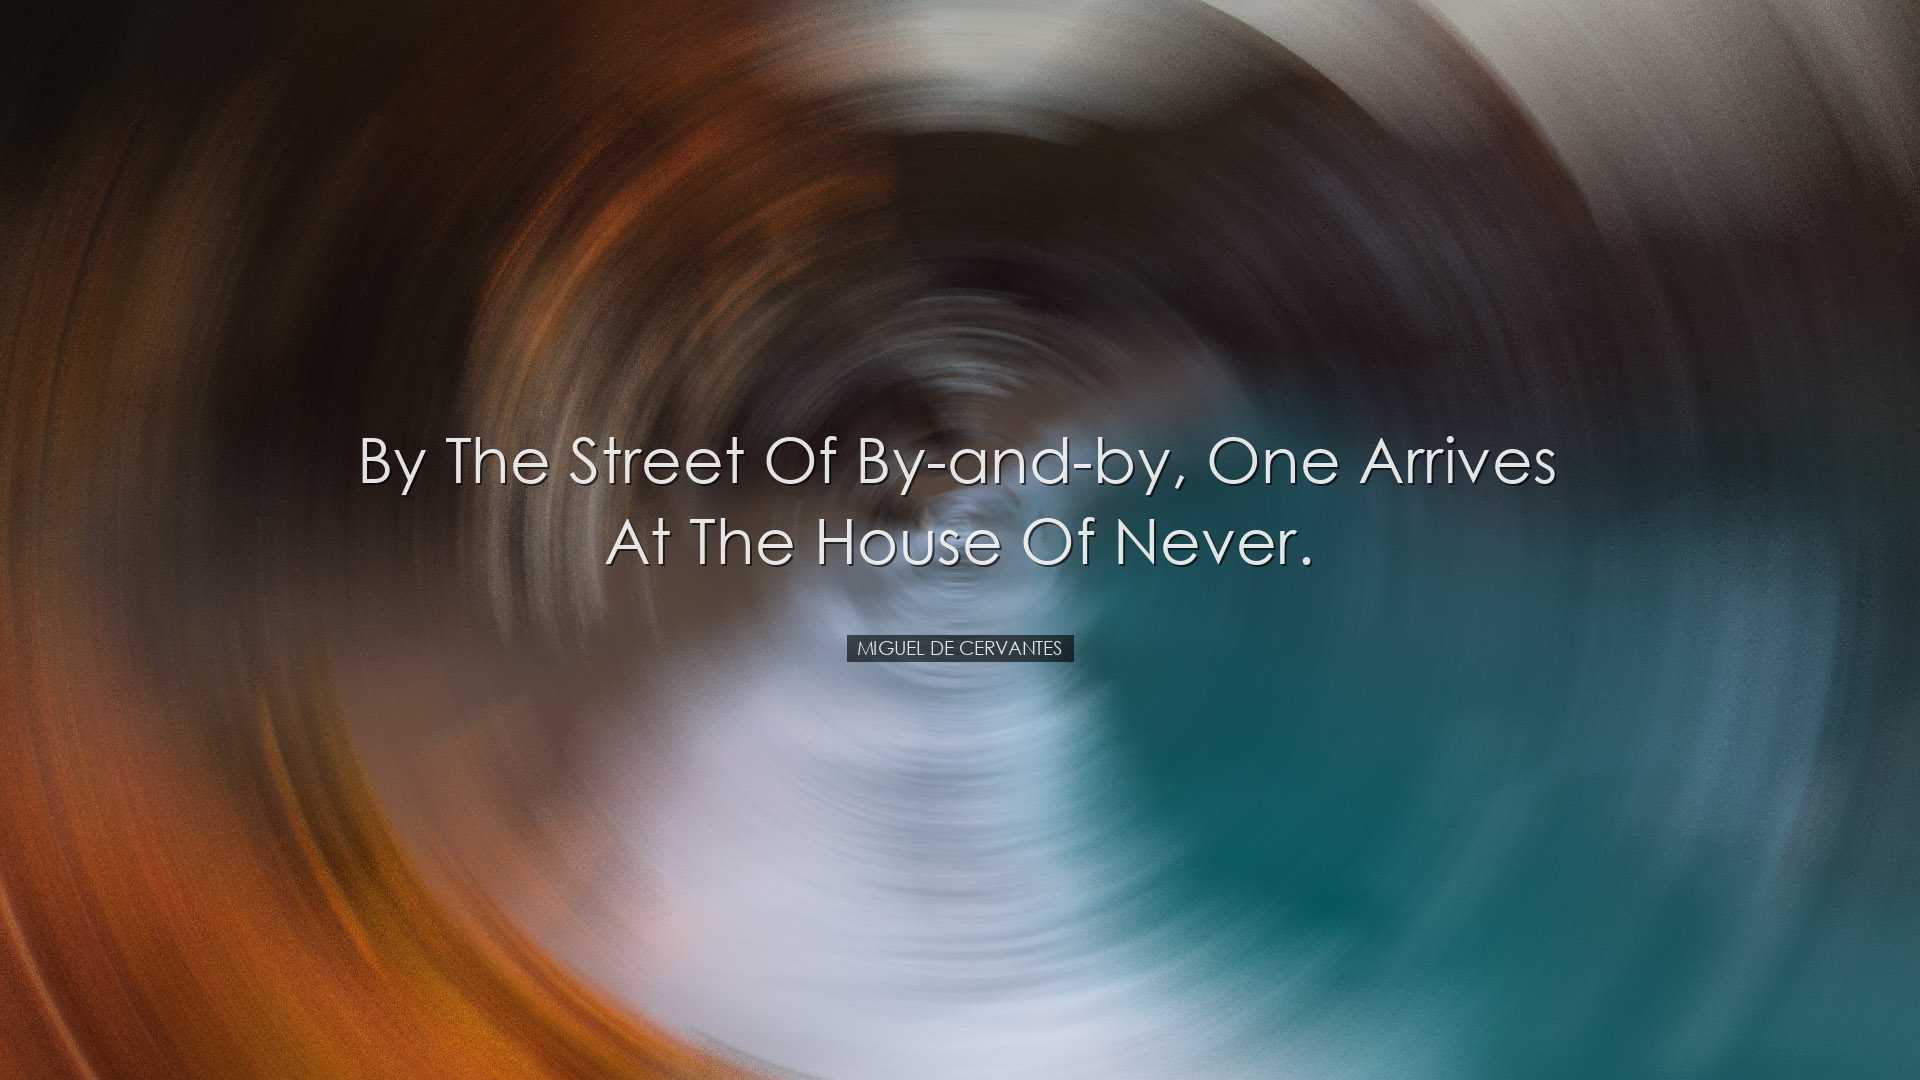 By the street of by-and-by, one arrives at the house of never. - M